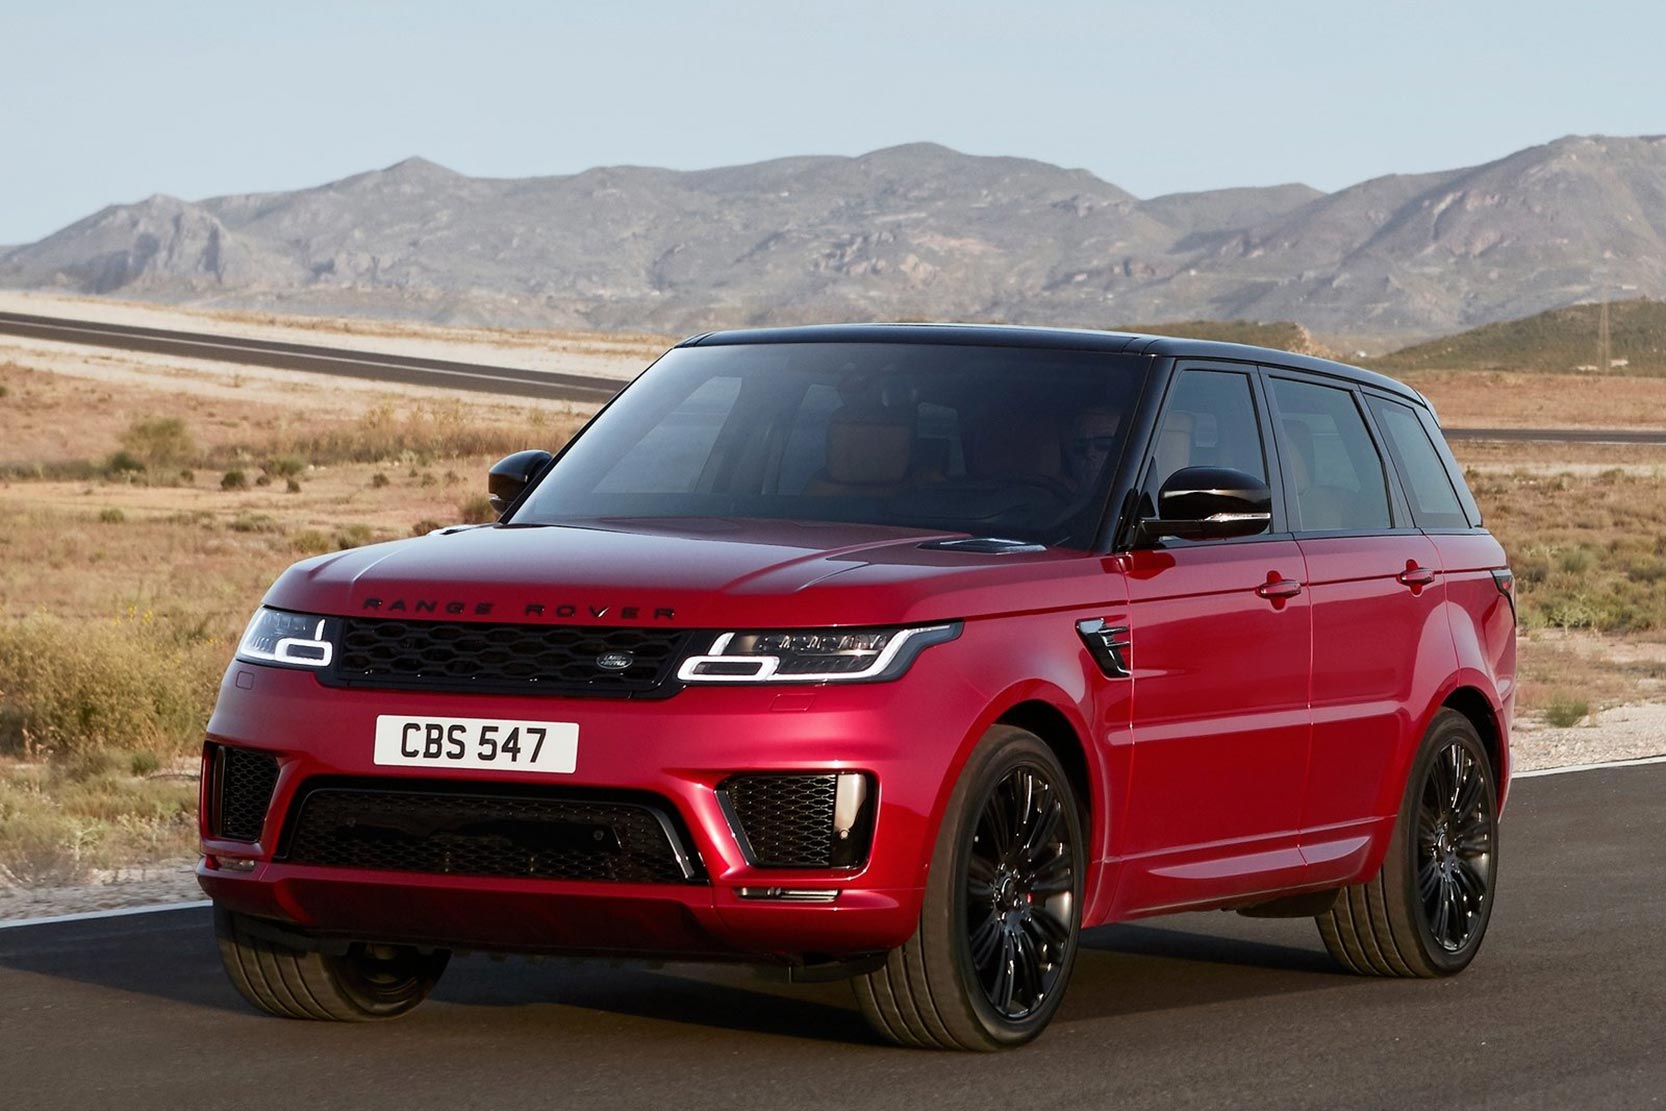 2019 Supercharged Range Rover - Photos All Recommendation